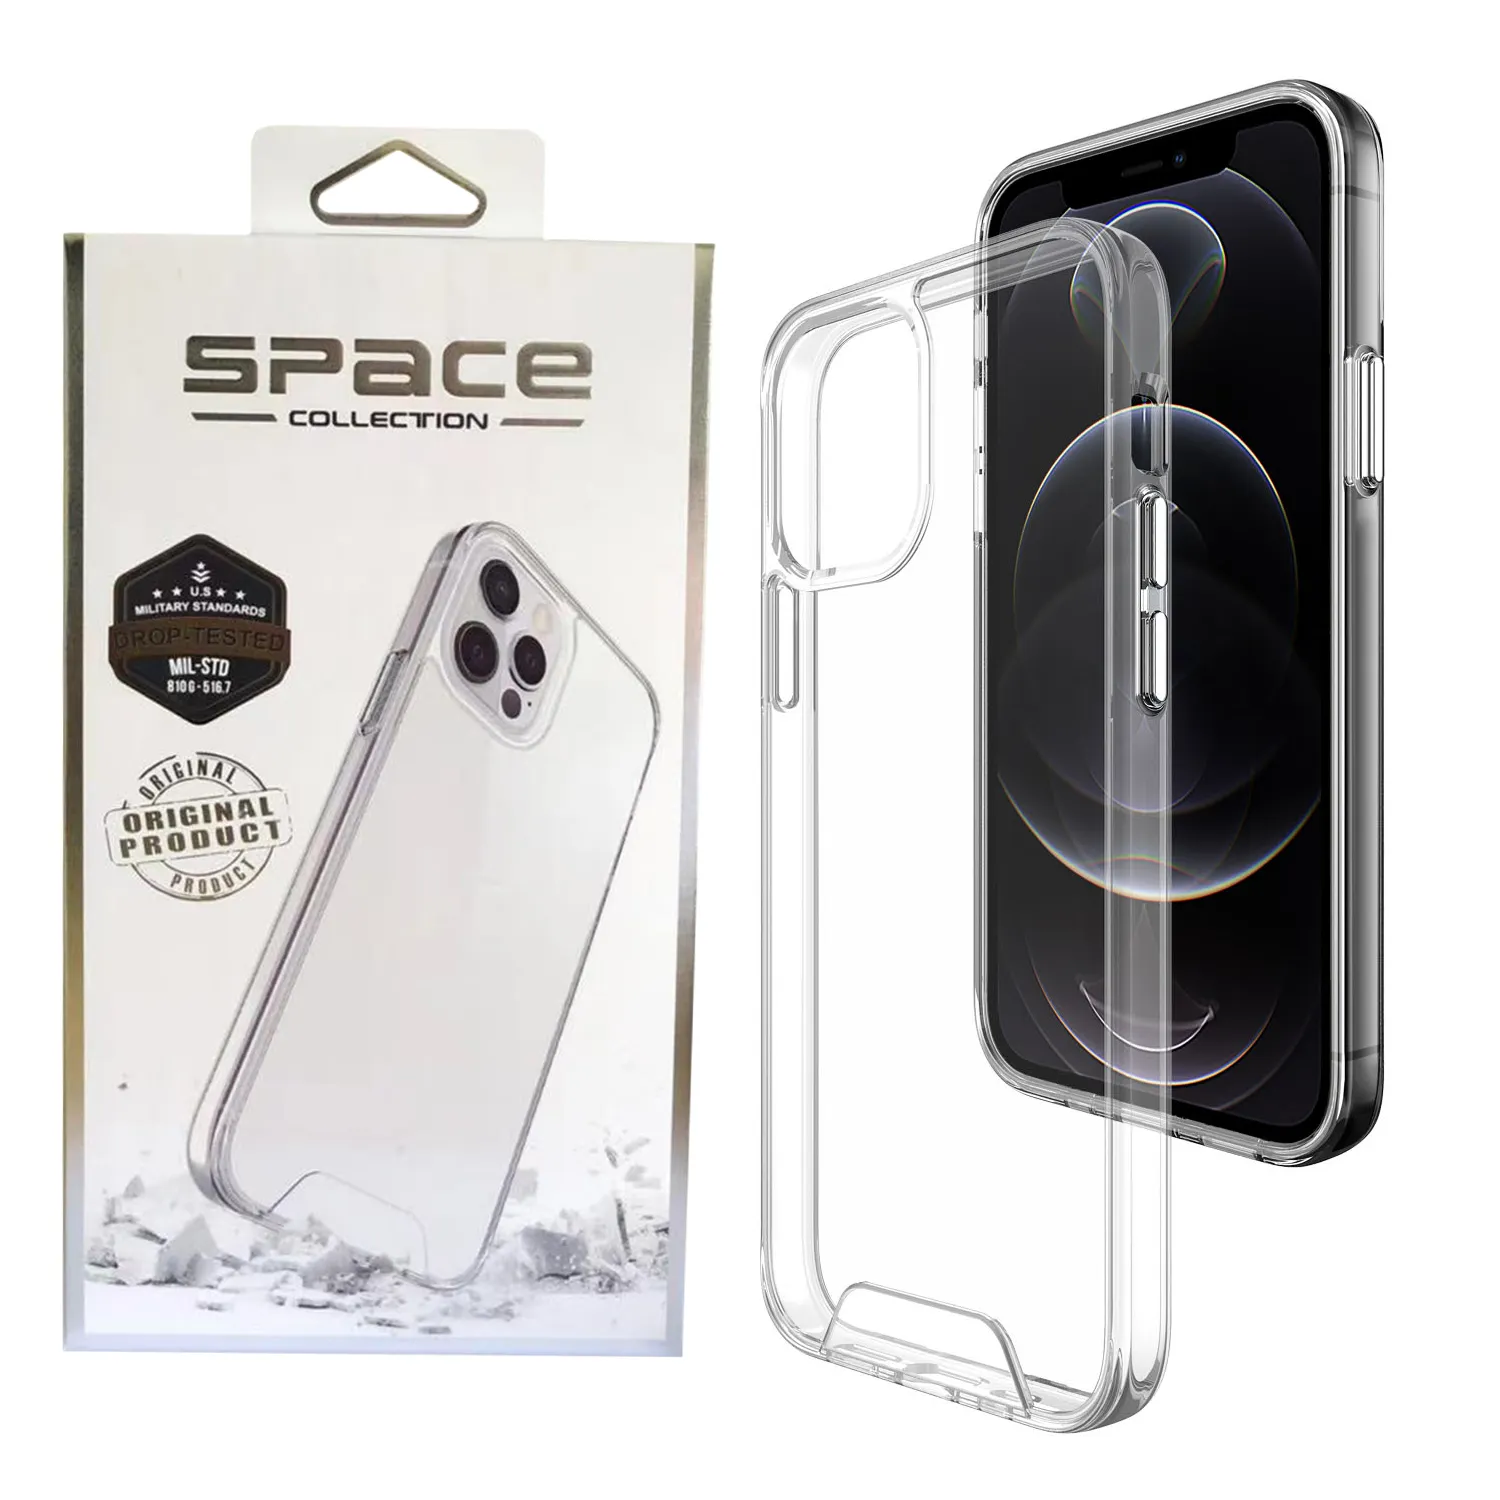 Premium Transparent Rugged Clear Shockproof SPACE Phone Cases Cover For iPhone 14 13 12 11 Pro Max XR XS X 6 7 8 Plus Samsung S21 S20 Note20 Ultra With Retail Package